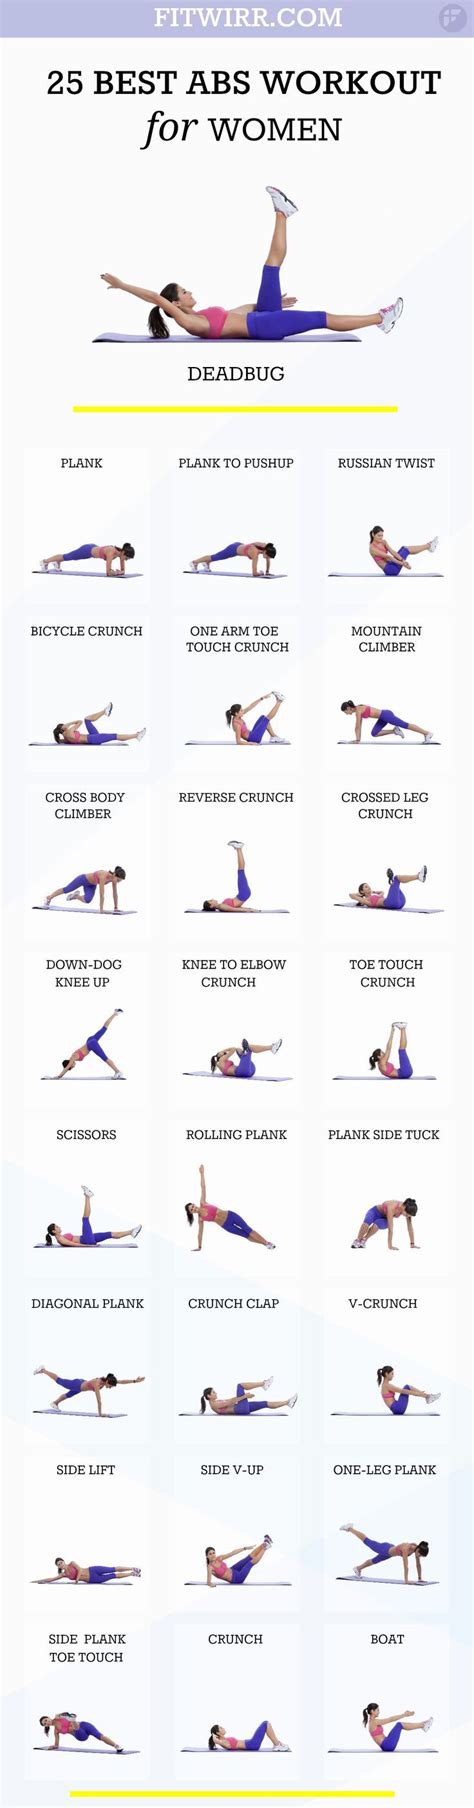 Best Ab Workouts For Women To Get A Flat Stomach Fitwirr Abs Workout For Women Abs